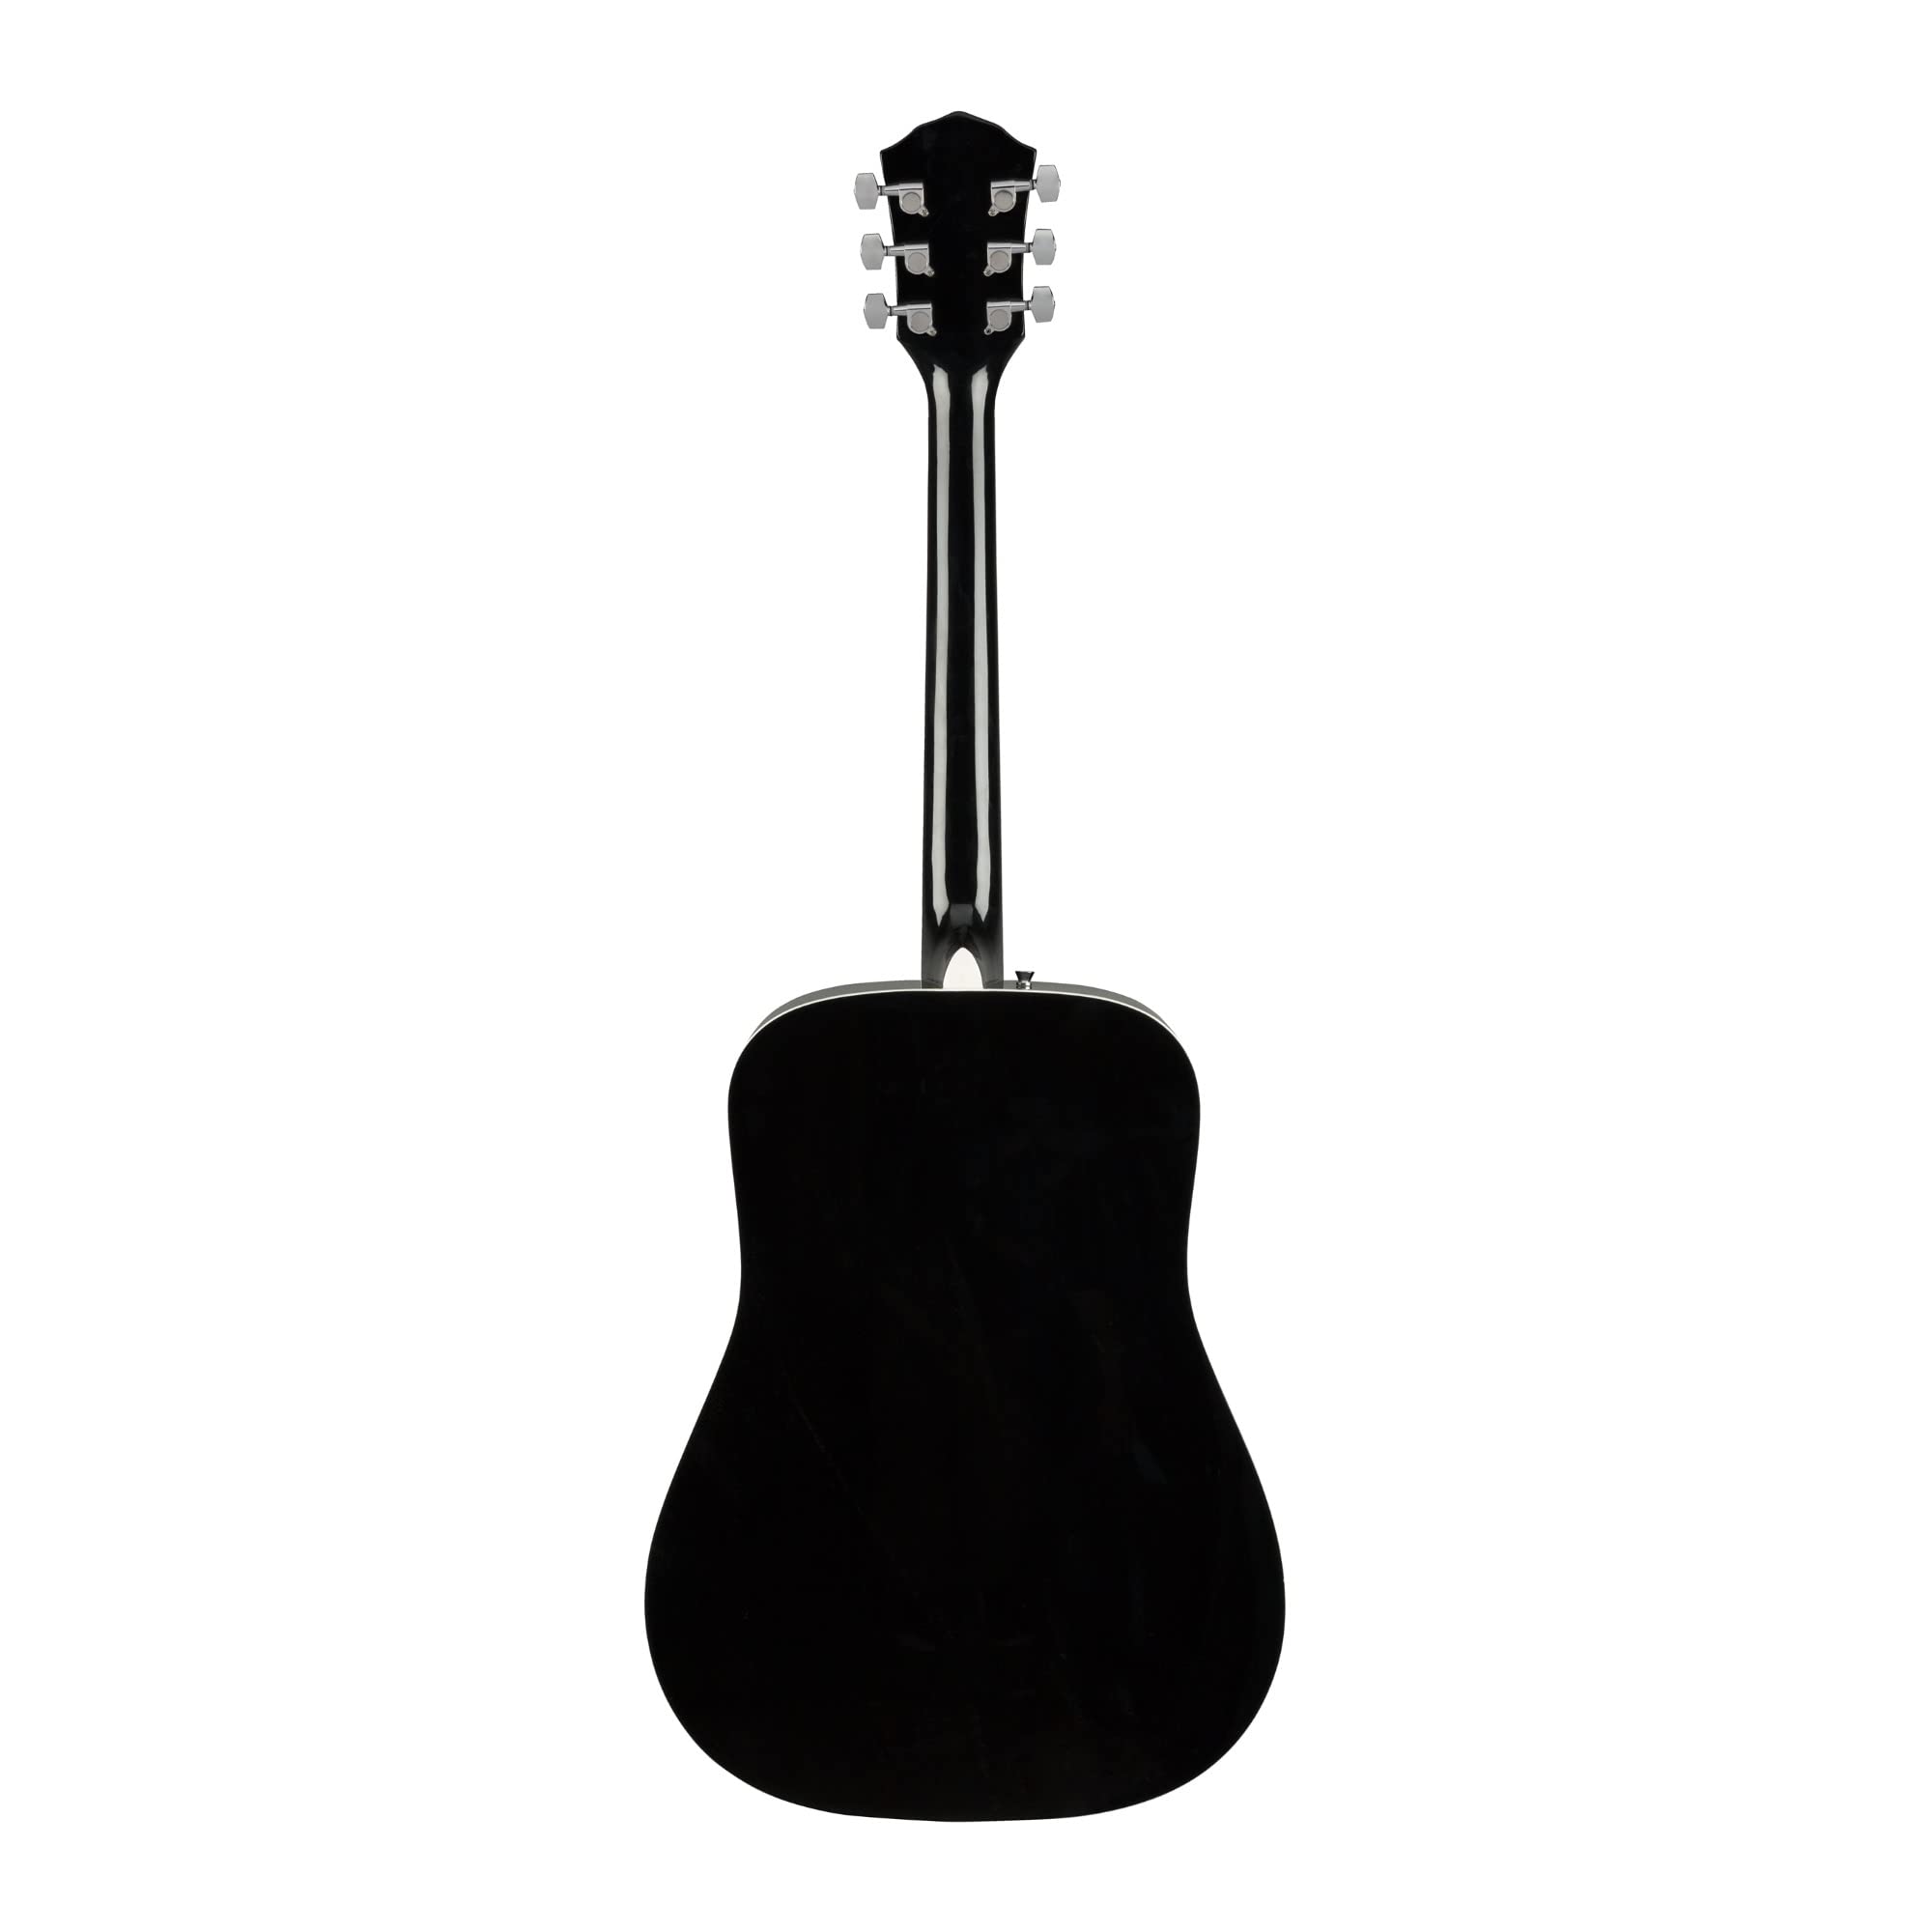 Fender FA-125 Dreadnought Acoustic Guitar, with 2-Year Warranty, Black, with Gig Bag